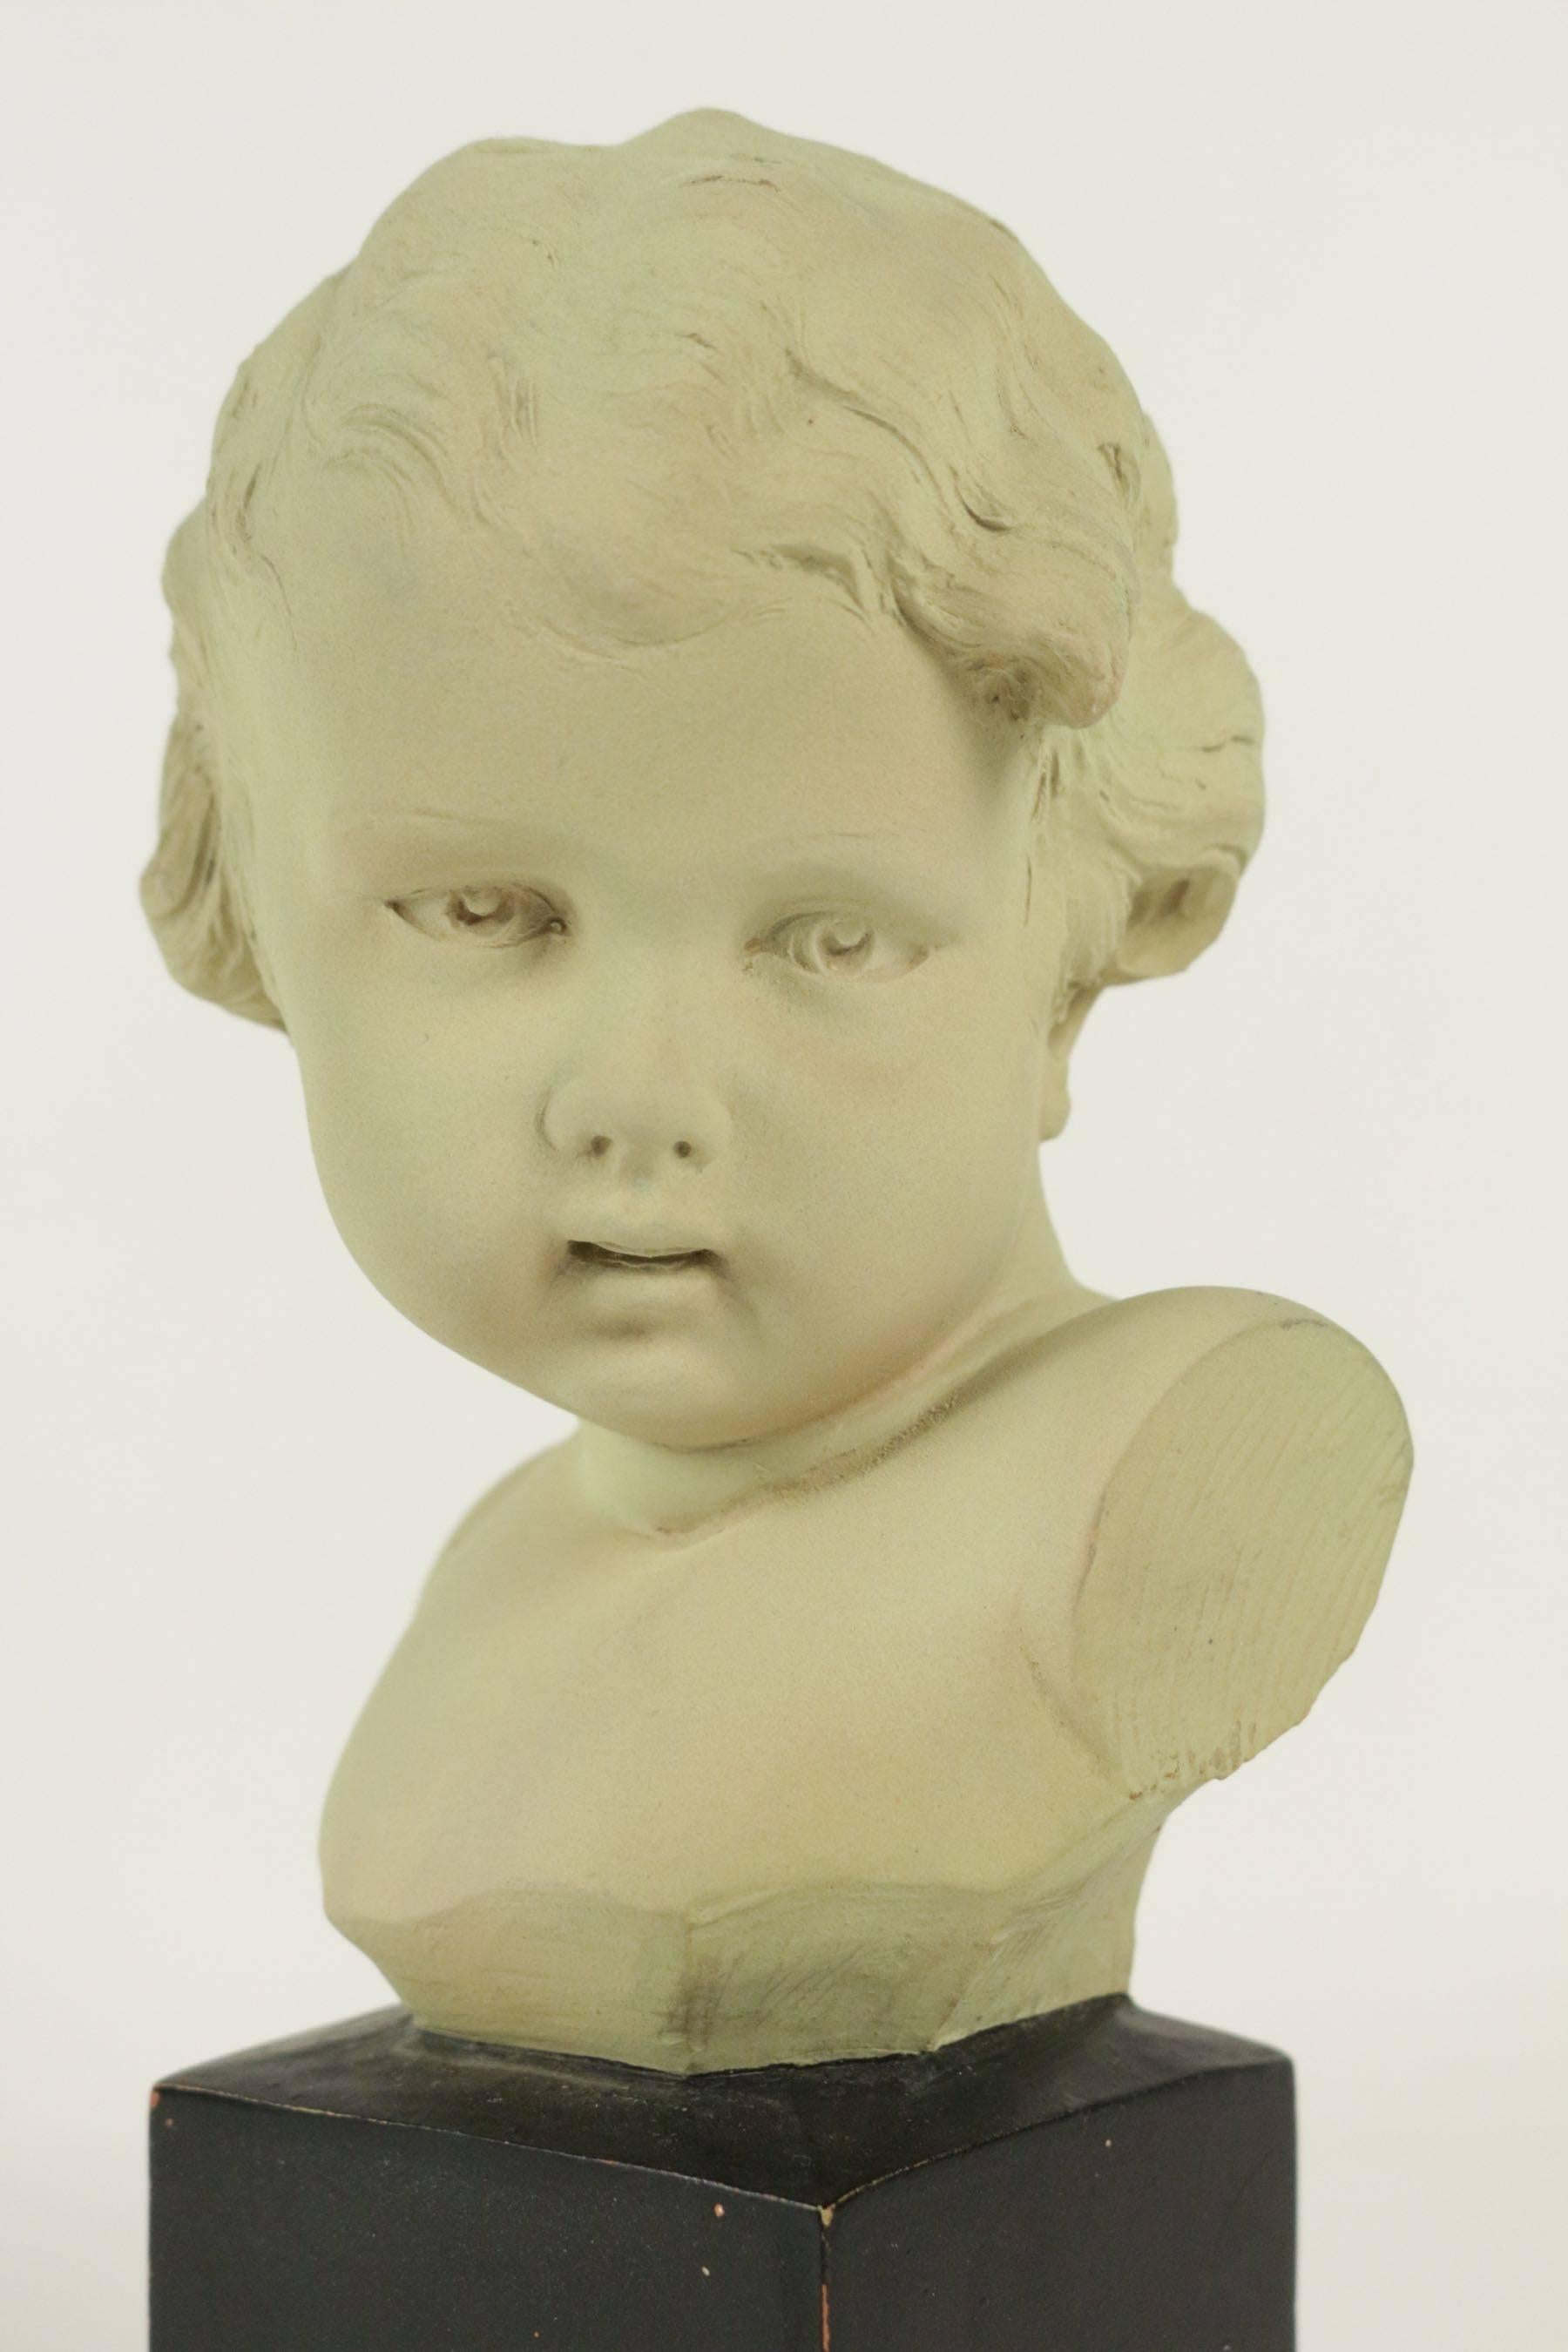 Terracotta Bust of a Child in Terra Cotta from the 20th Century, Signed Gobet